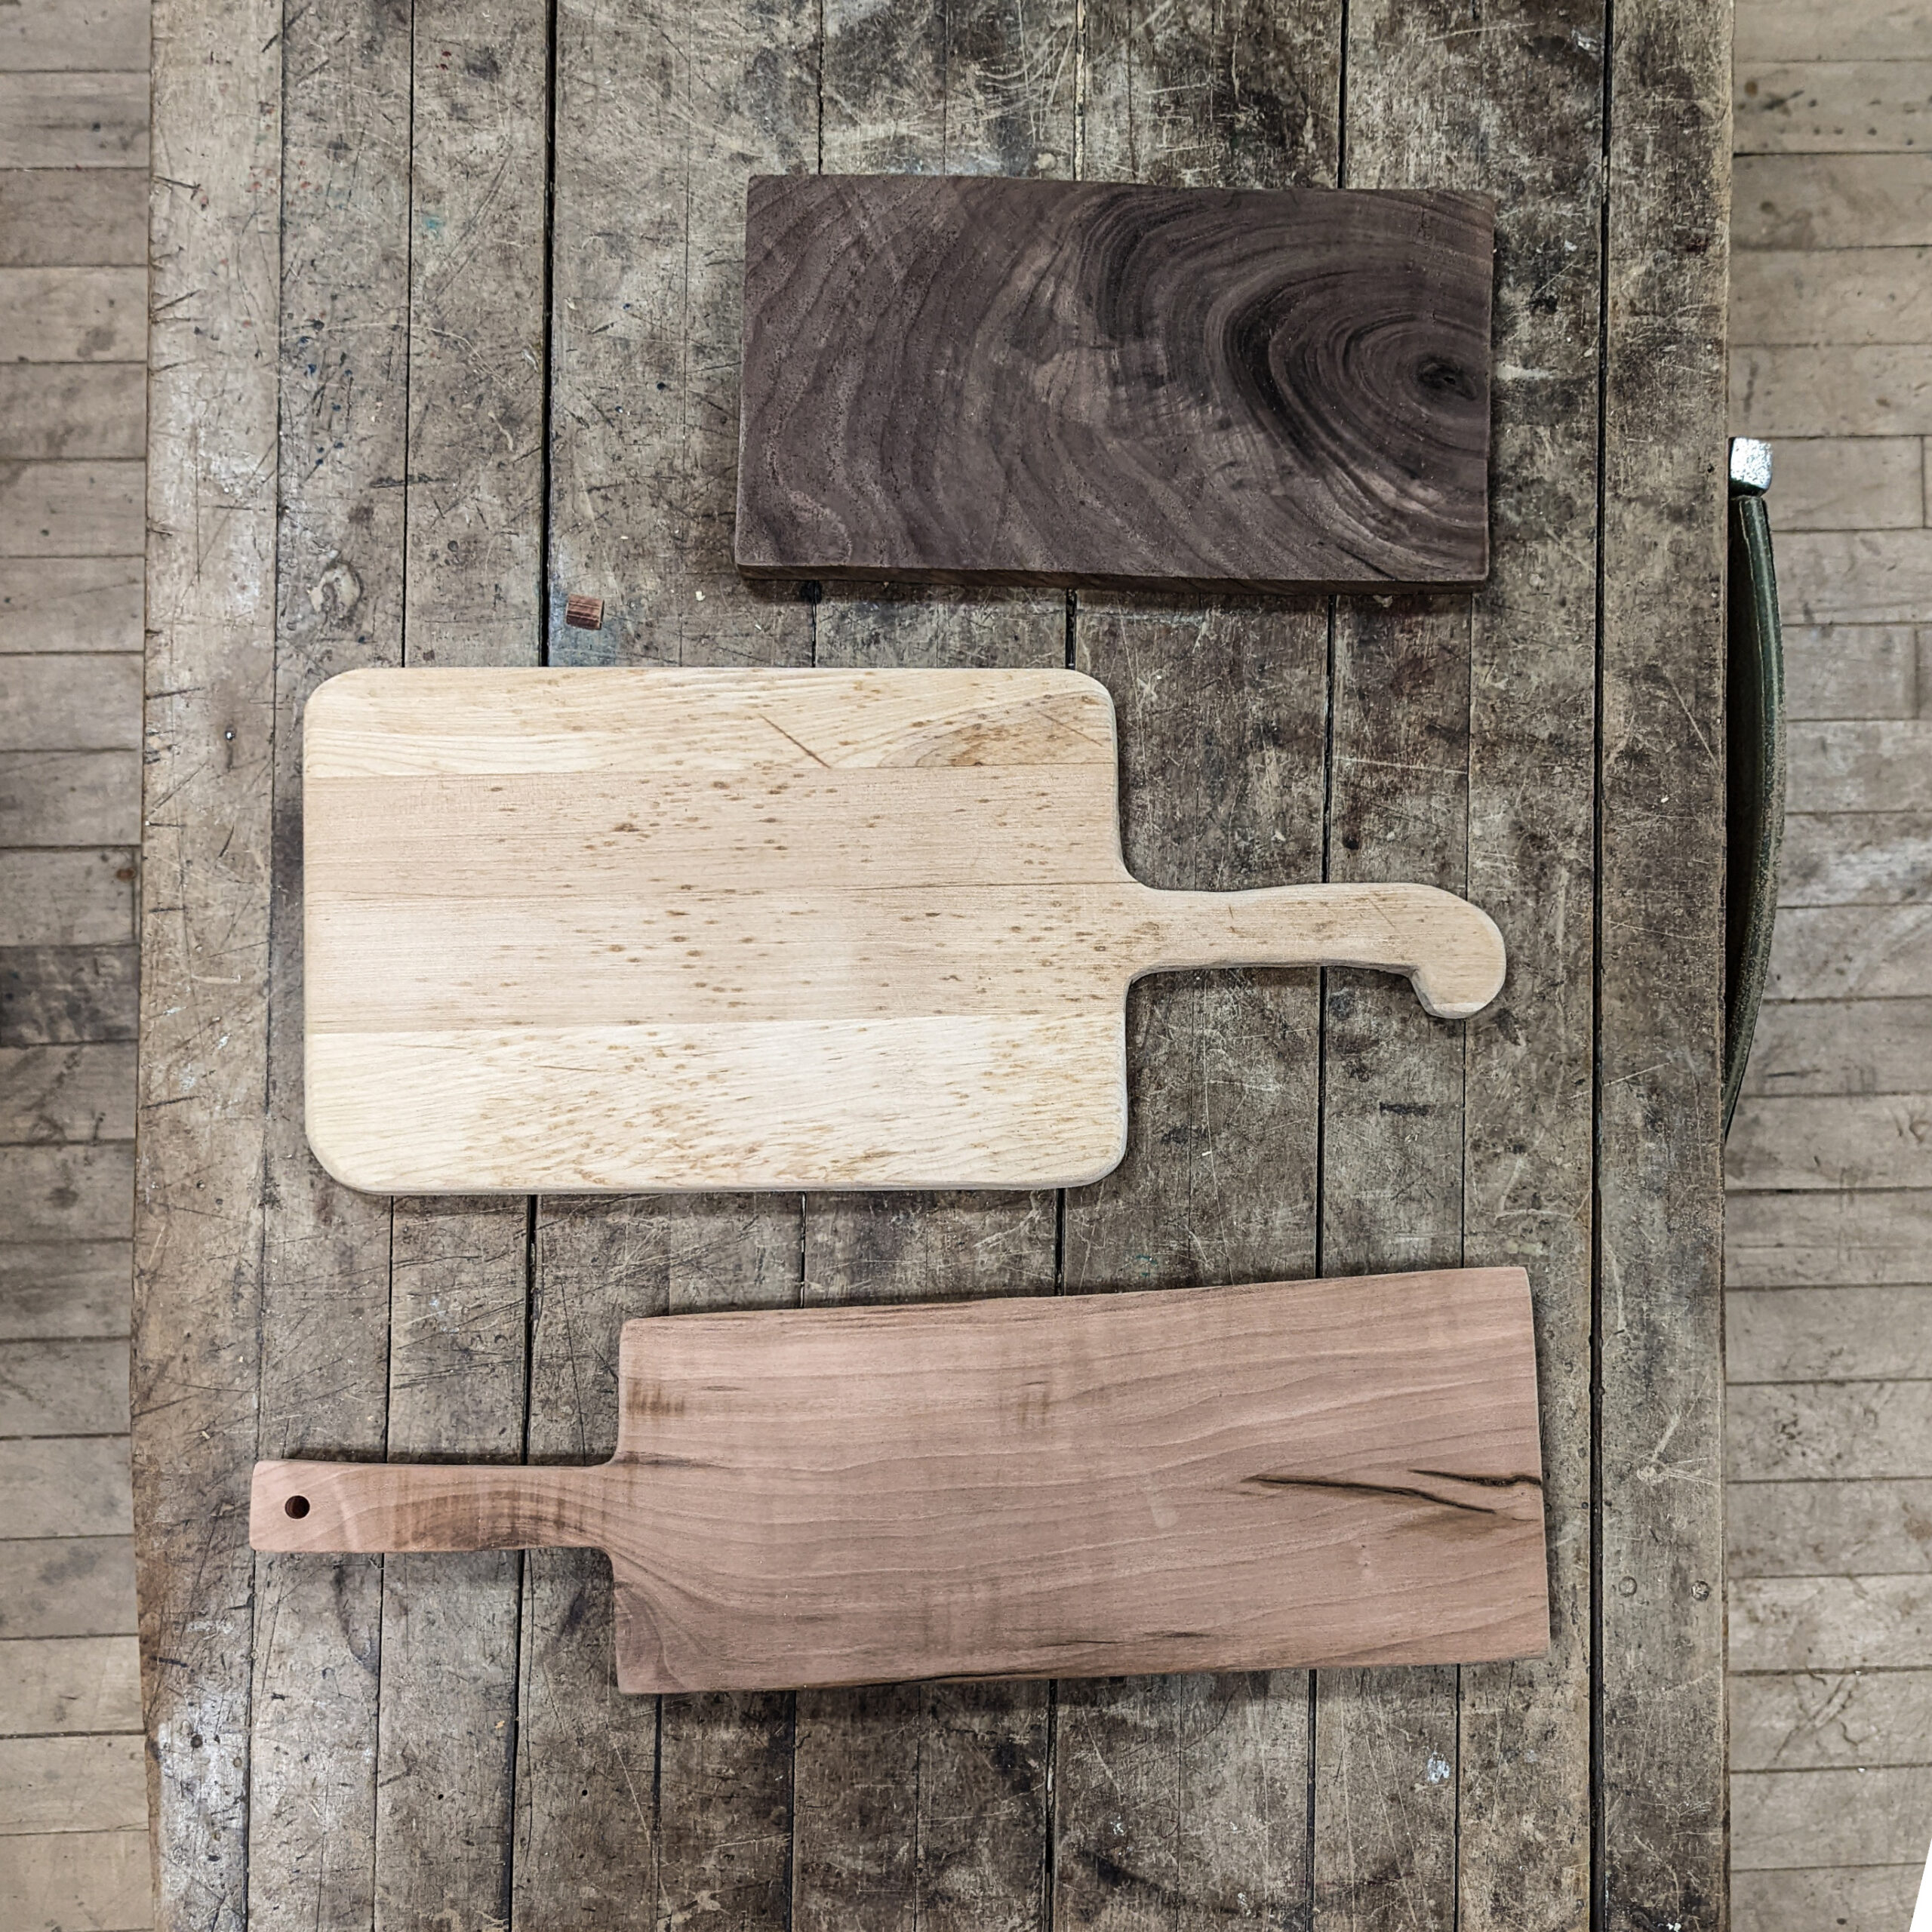 Homemade rustic cutting boards and cheese board made using basic tools in a shared community woodshop.